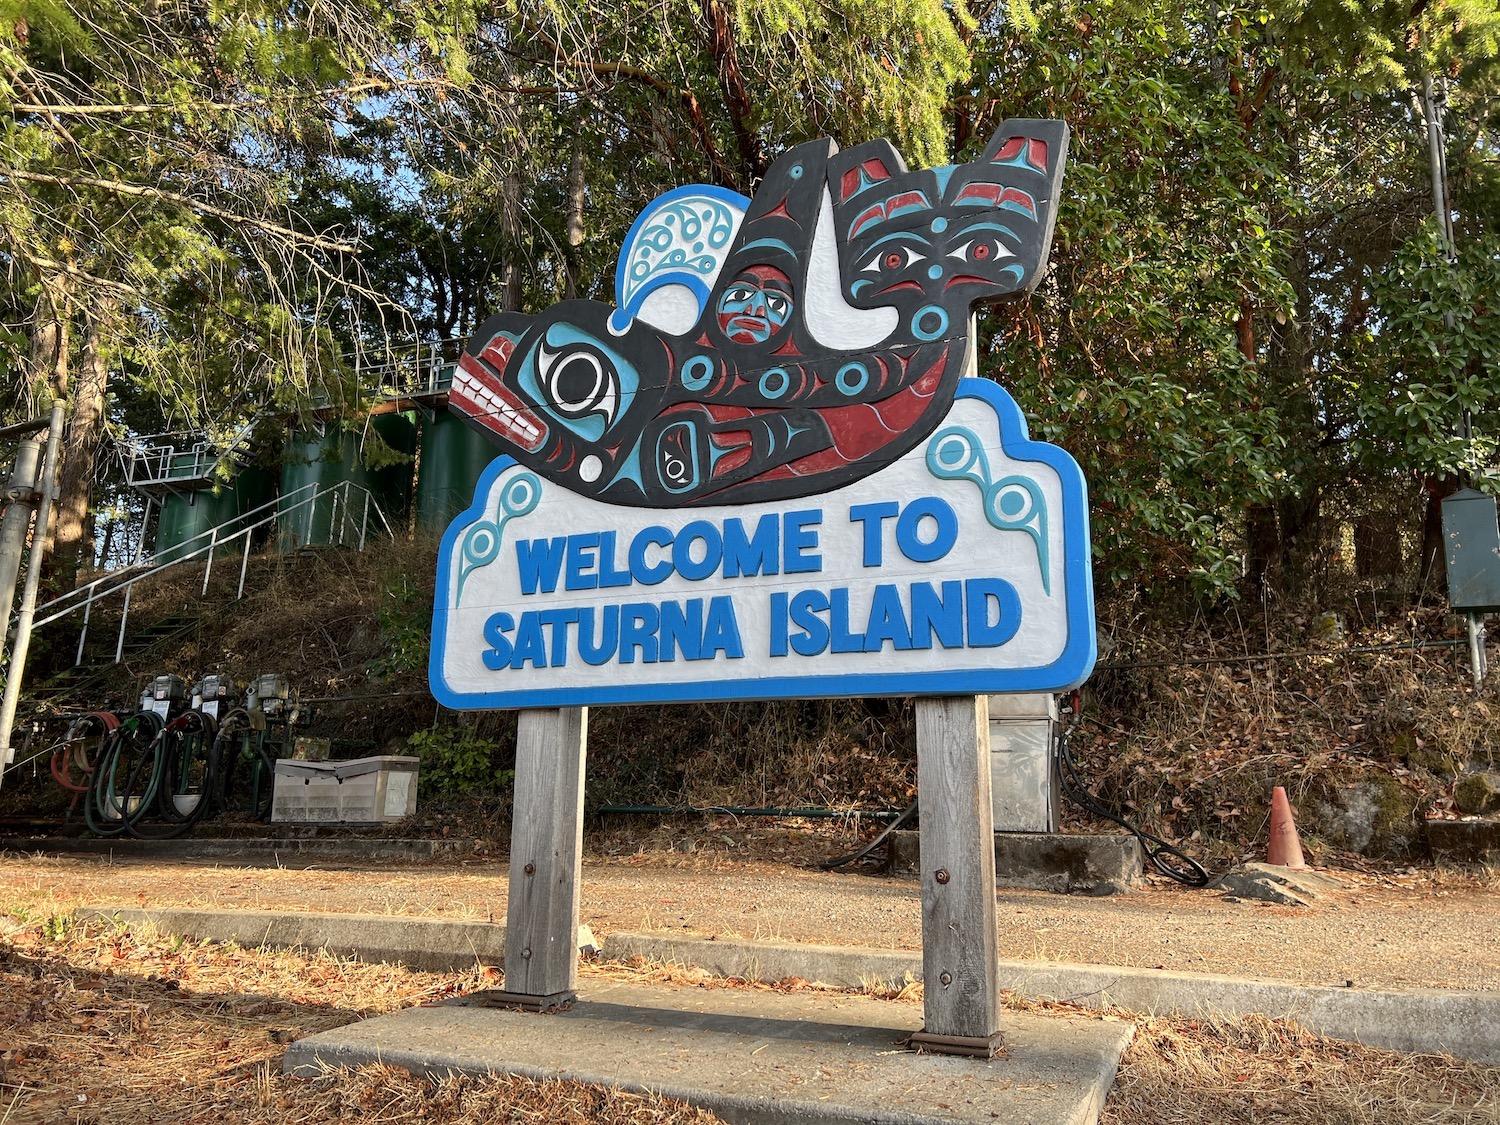 The "Welcome to Saturna Island" sign features a carving of an orca.